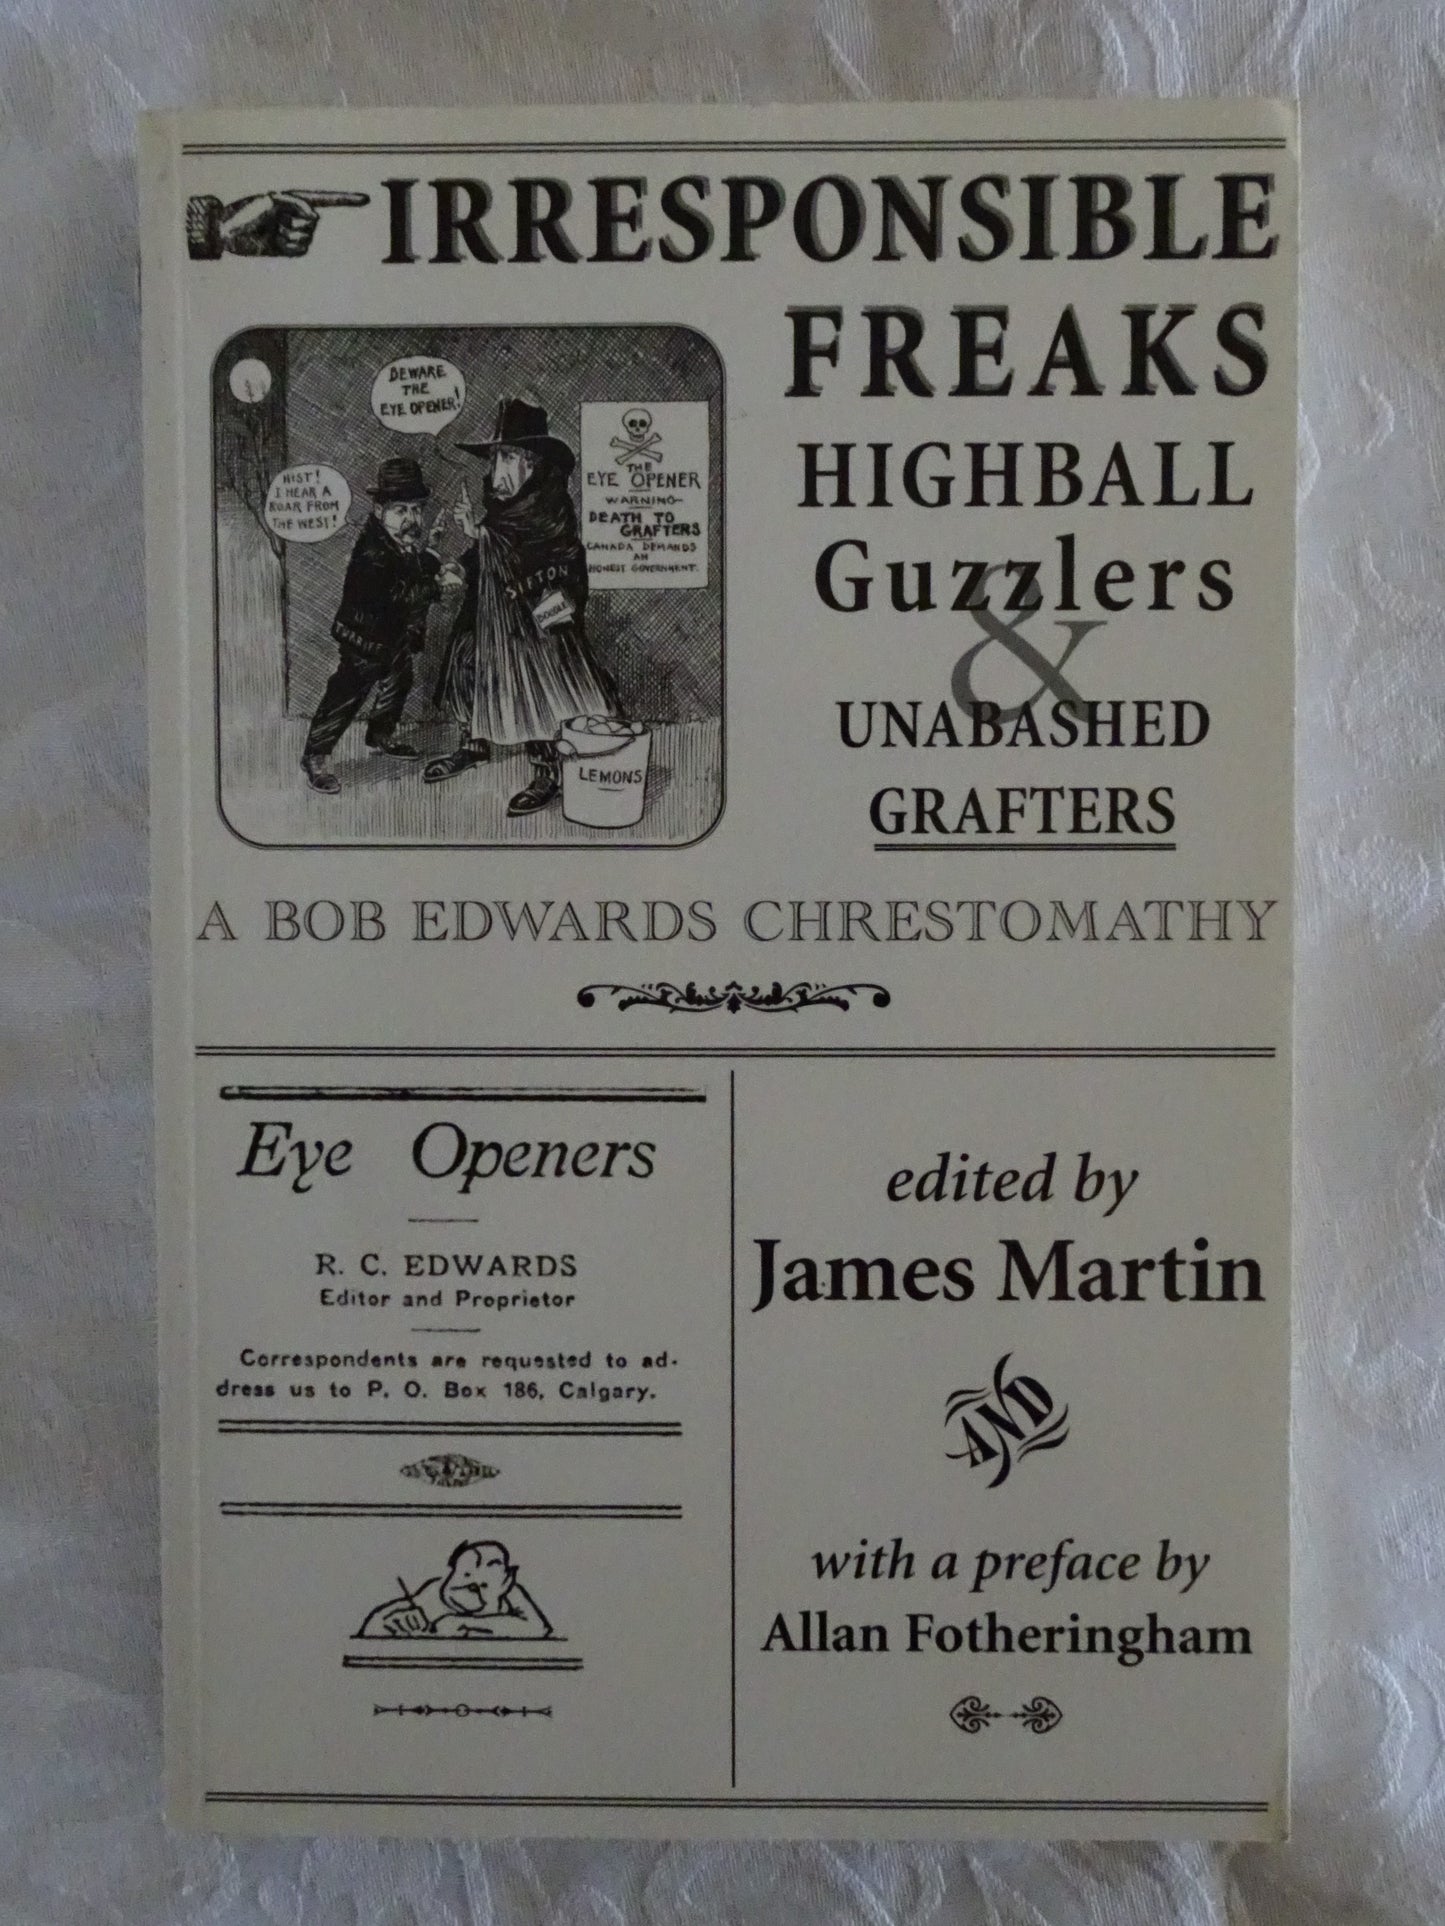 Irresponsible Freaks Highball Guzzlers & Unabashed Grafters by Bob Edwards